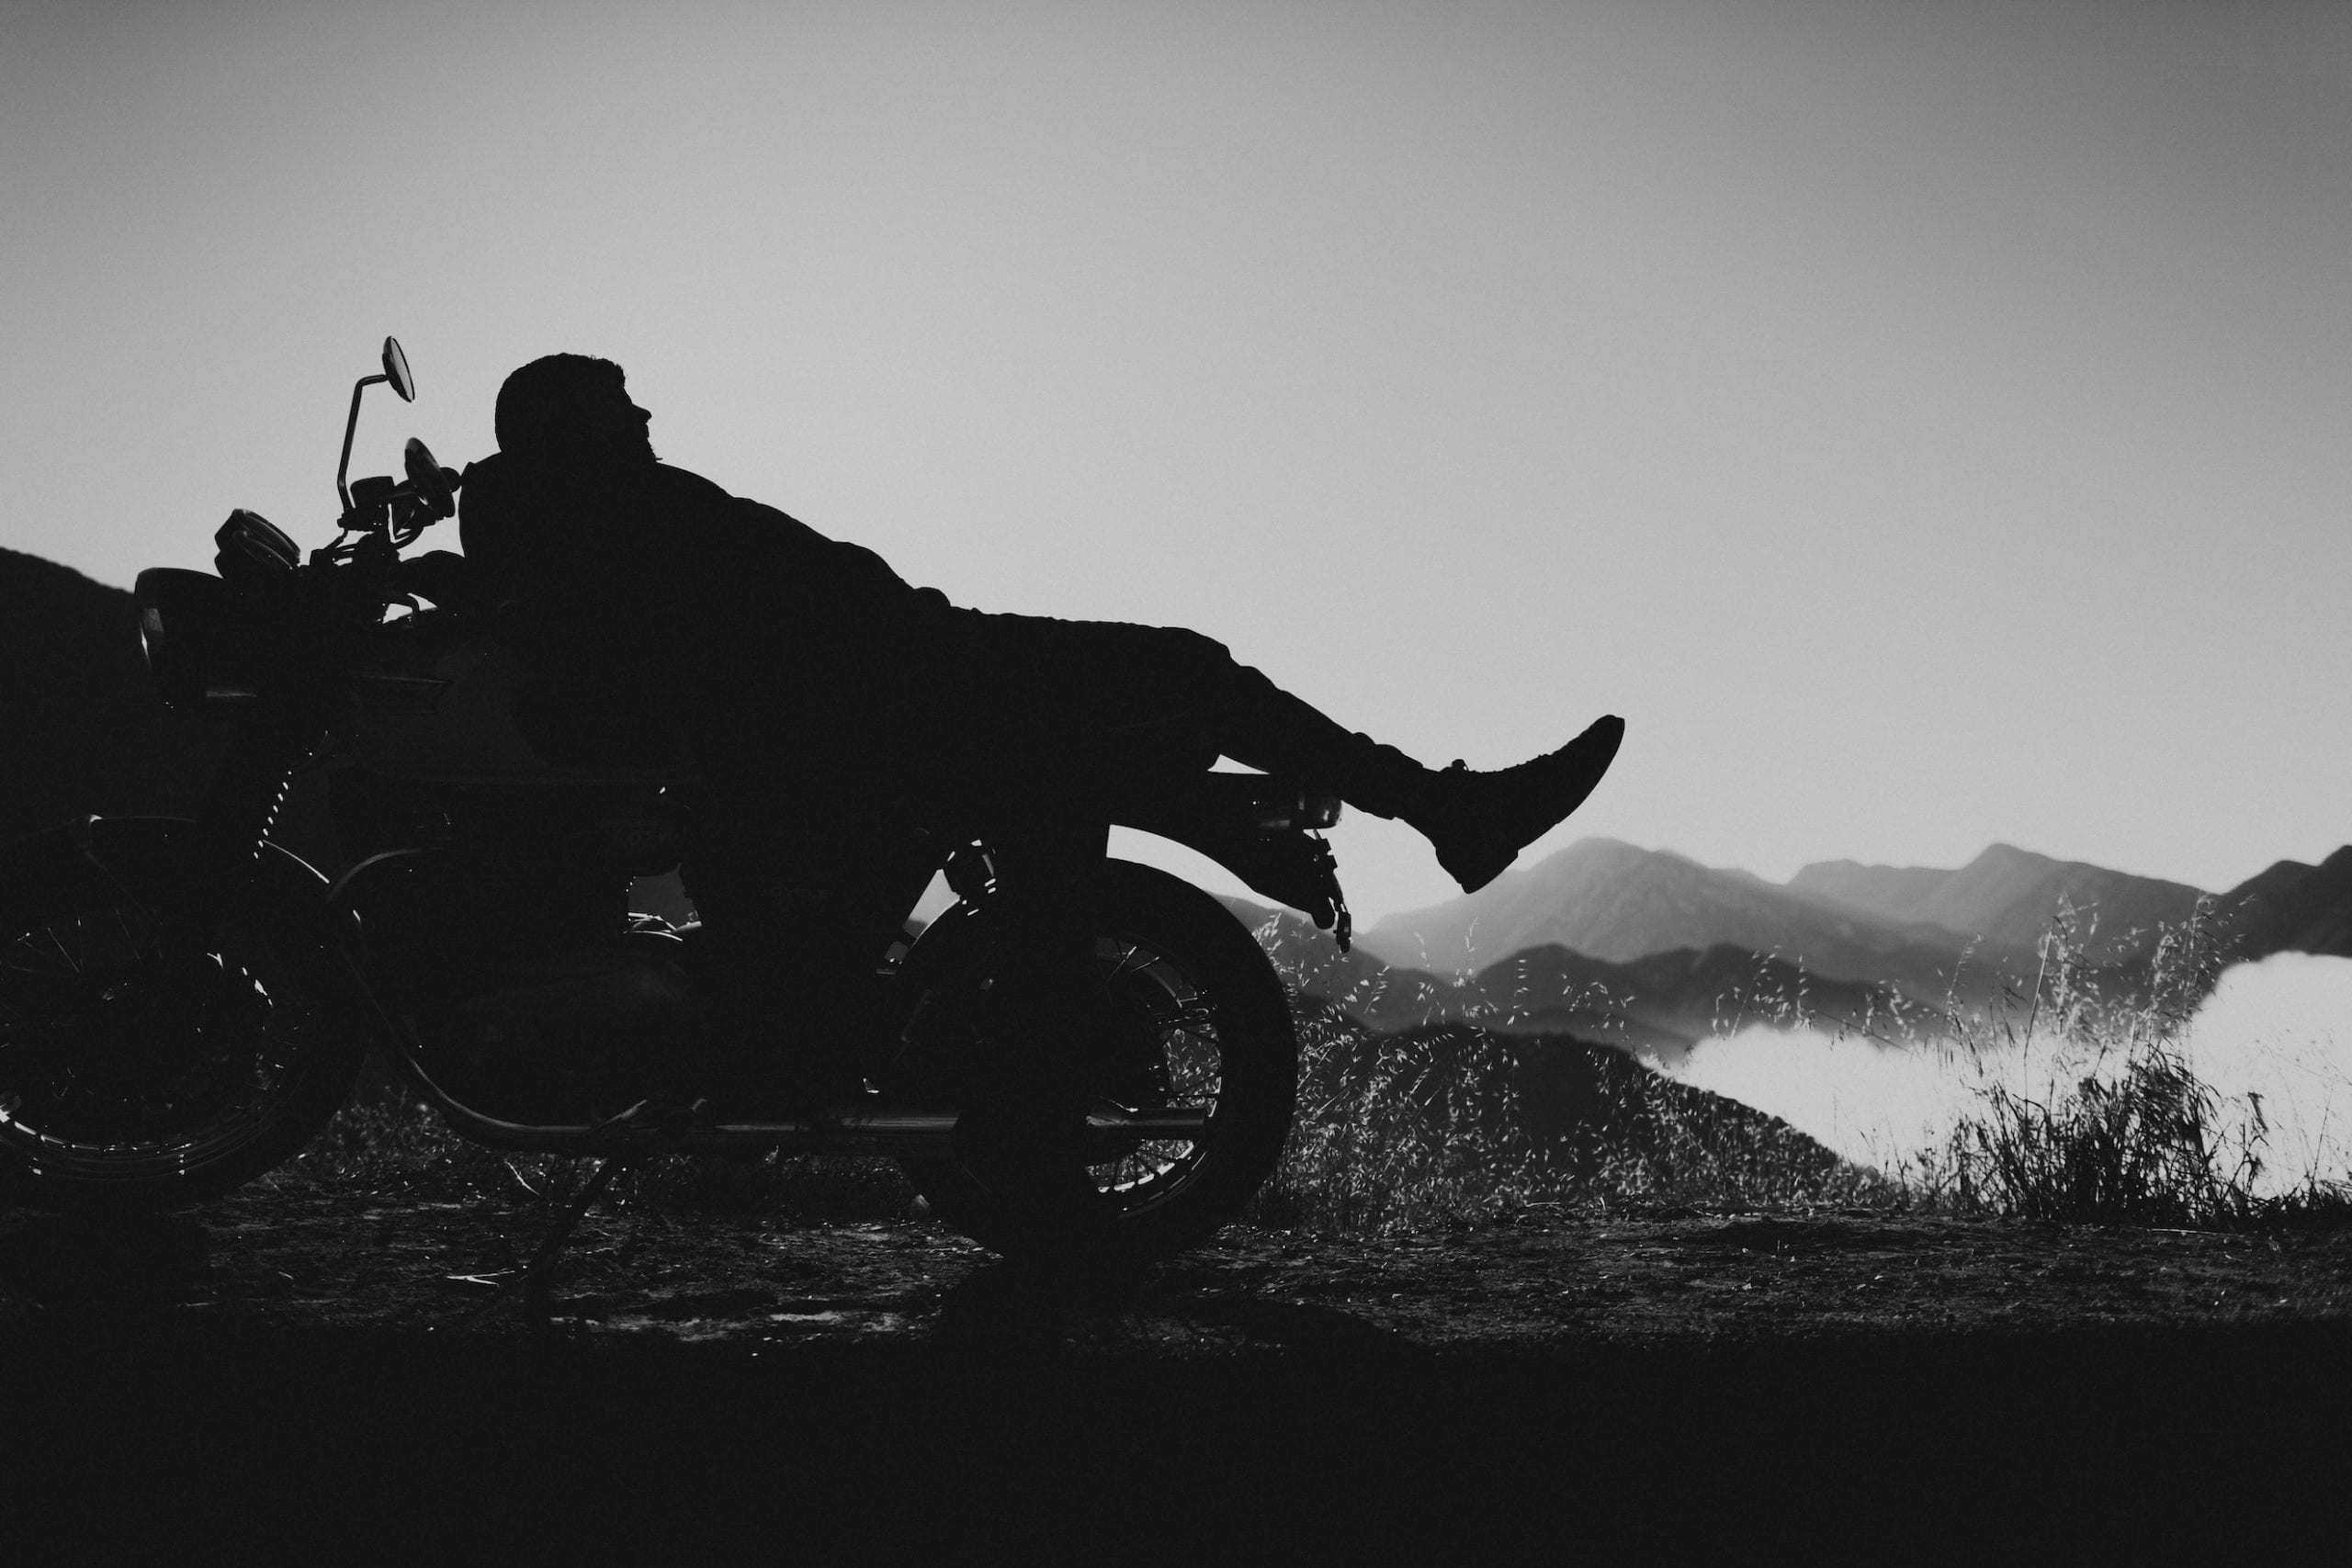 The motorcycle rider relaxes laying on the back of the motorcycle posing for the camera